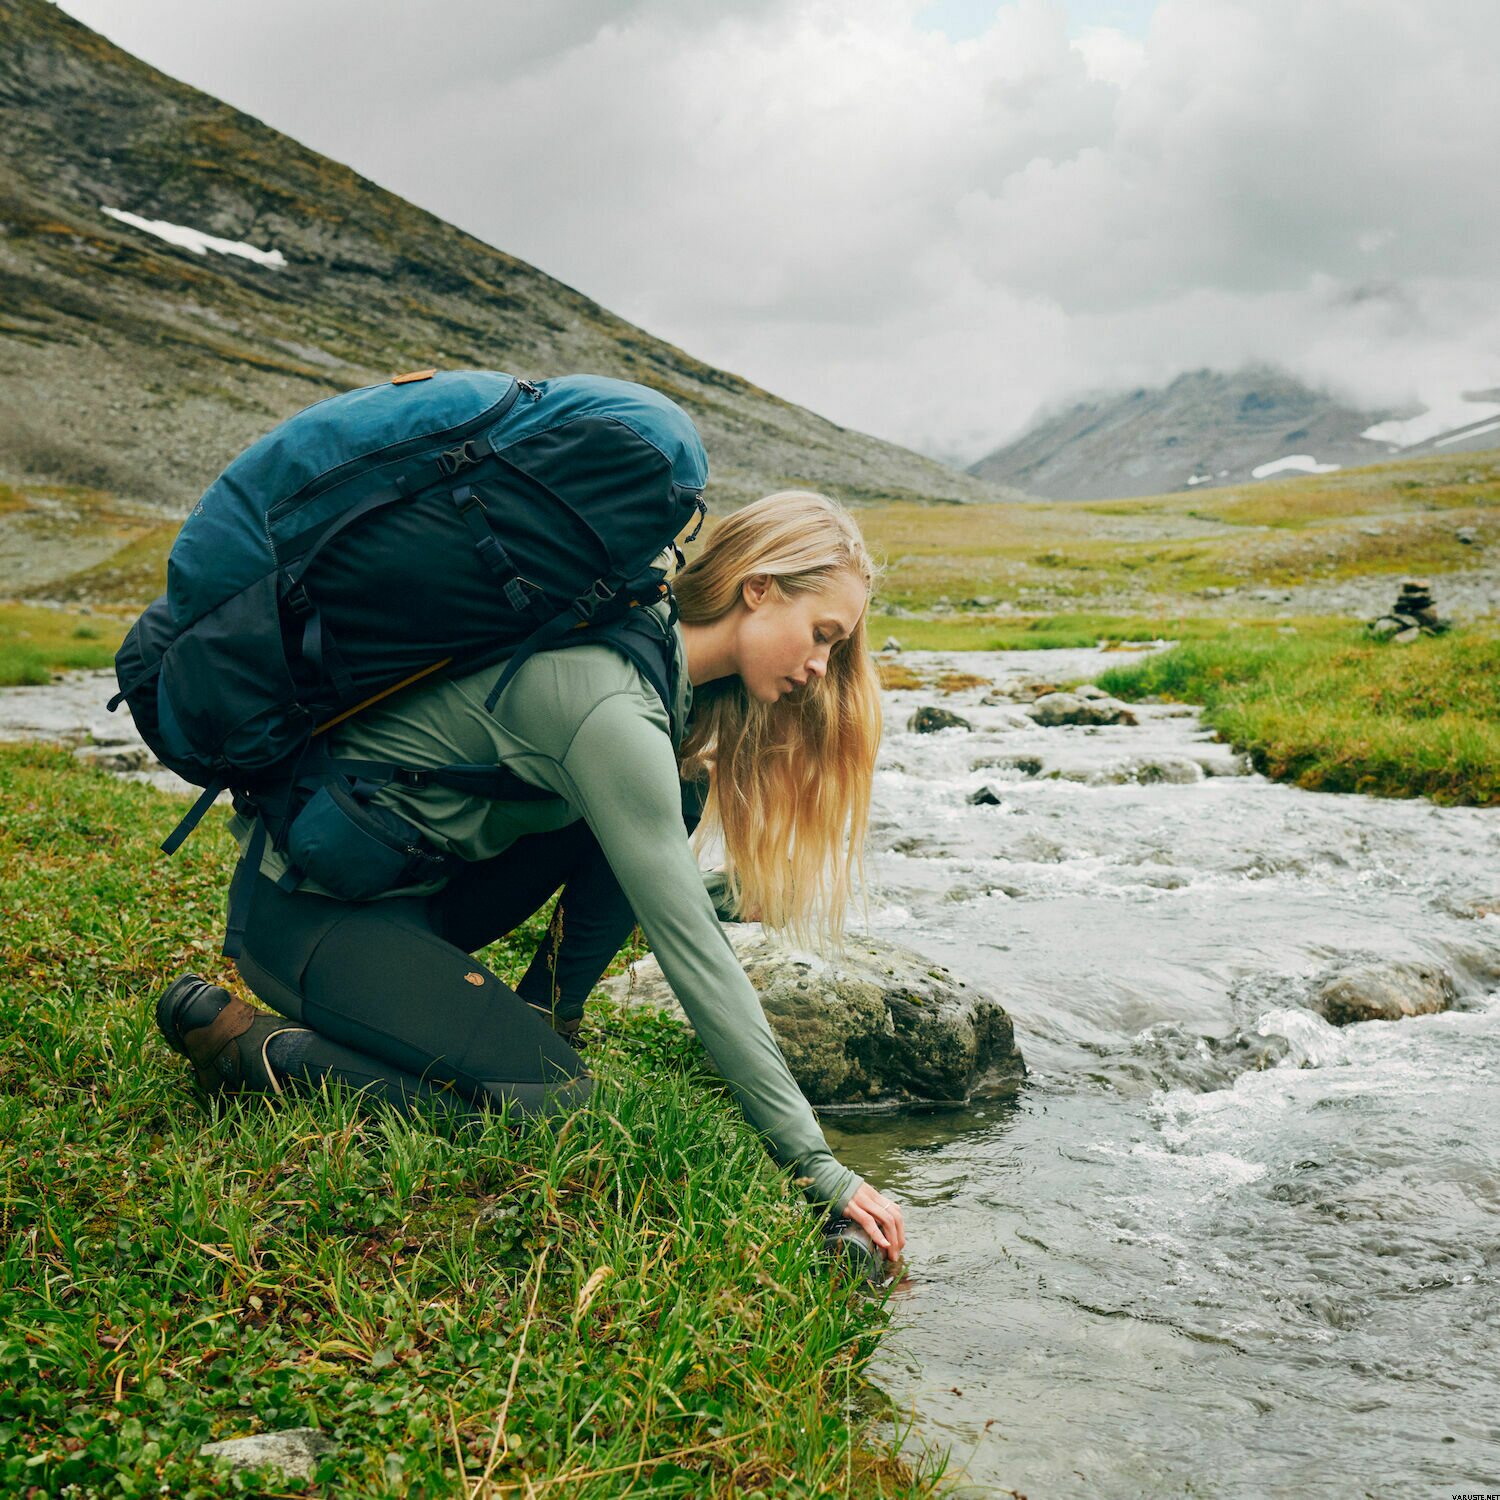 Fjallraven Abisko Trekking Tight Women's Review Tested By, 59% OFF